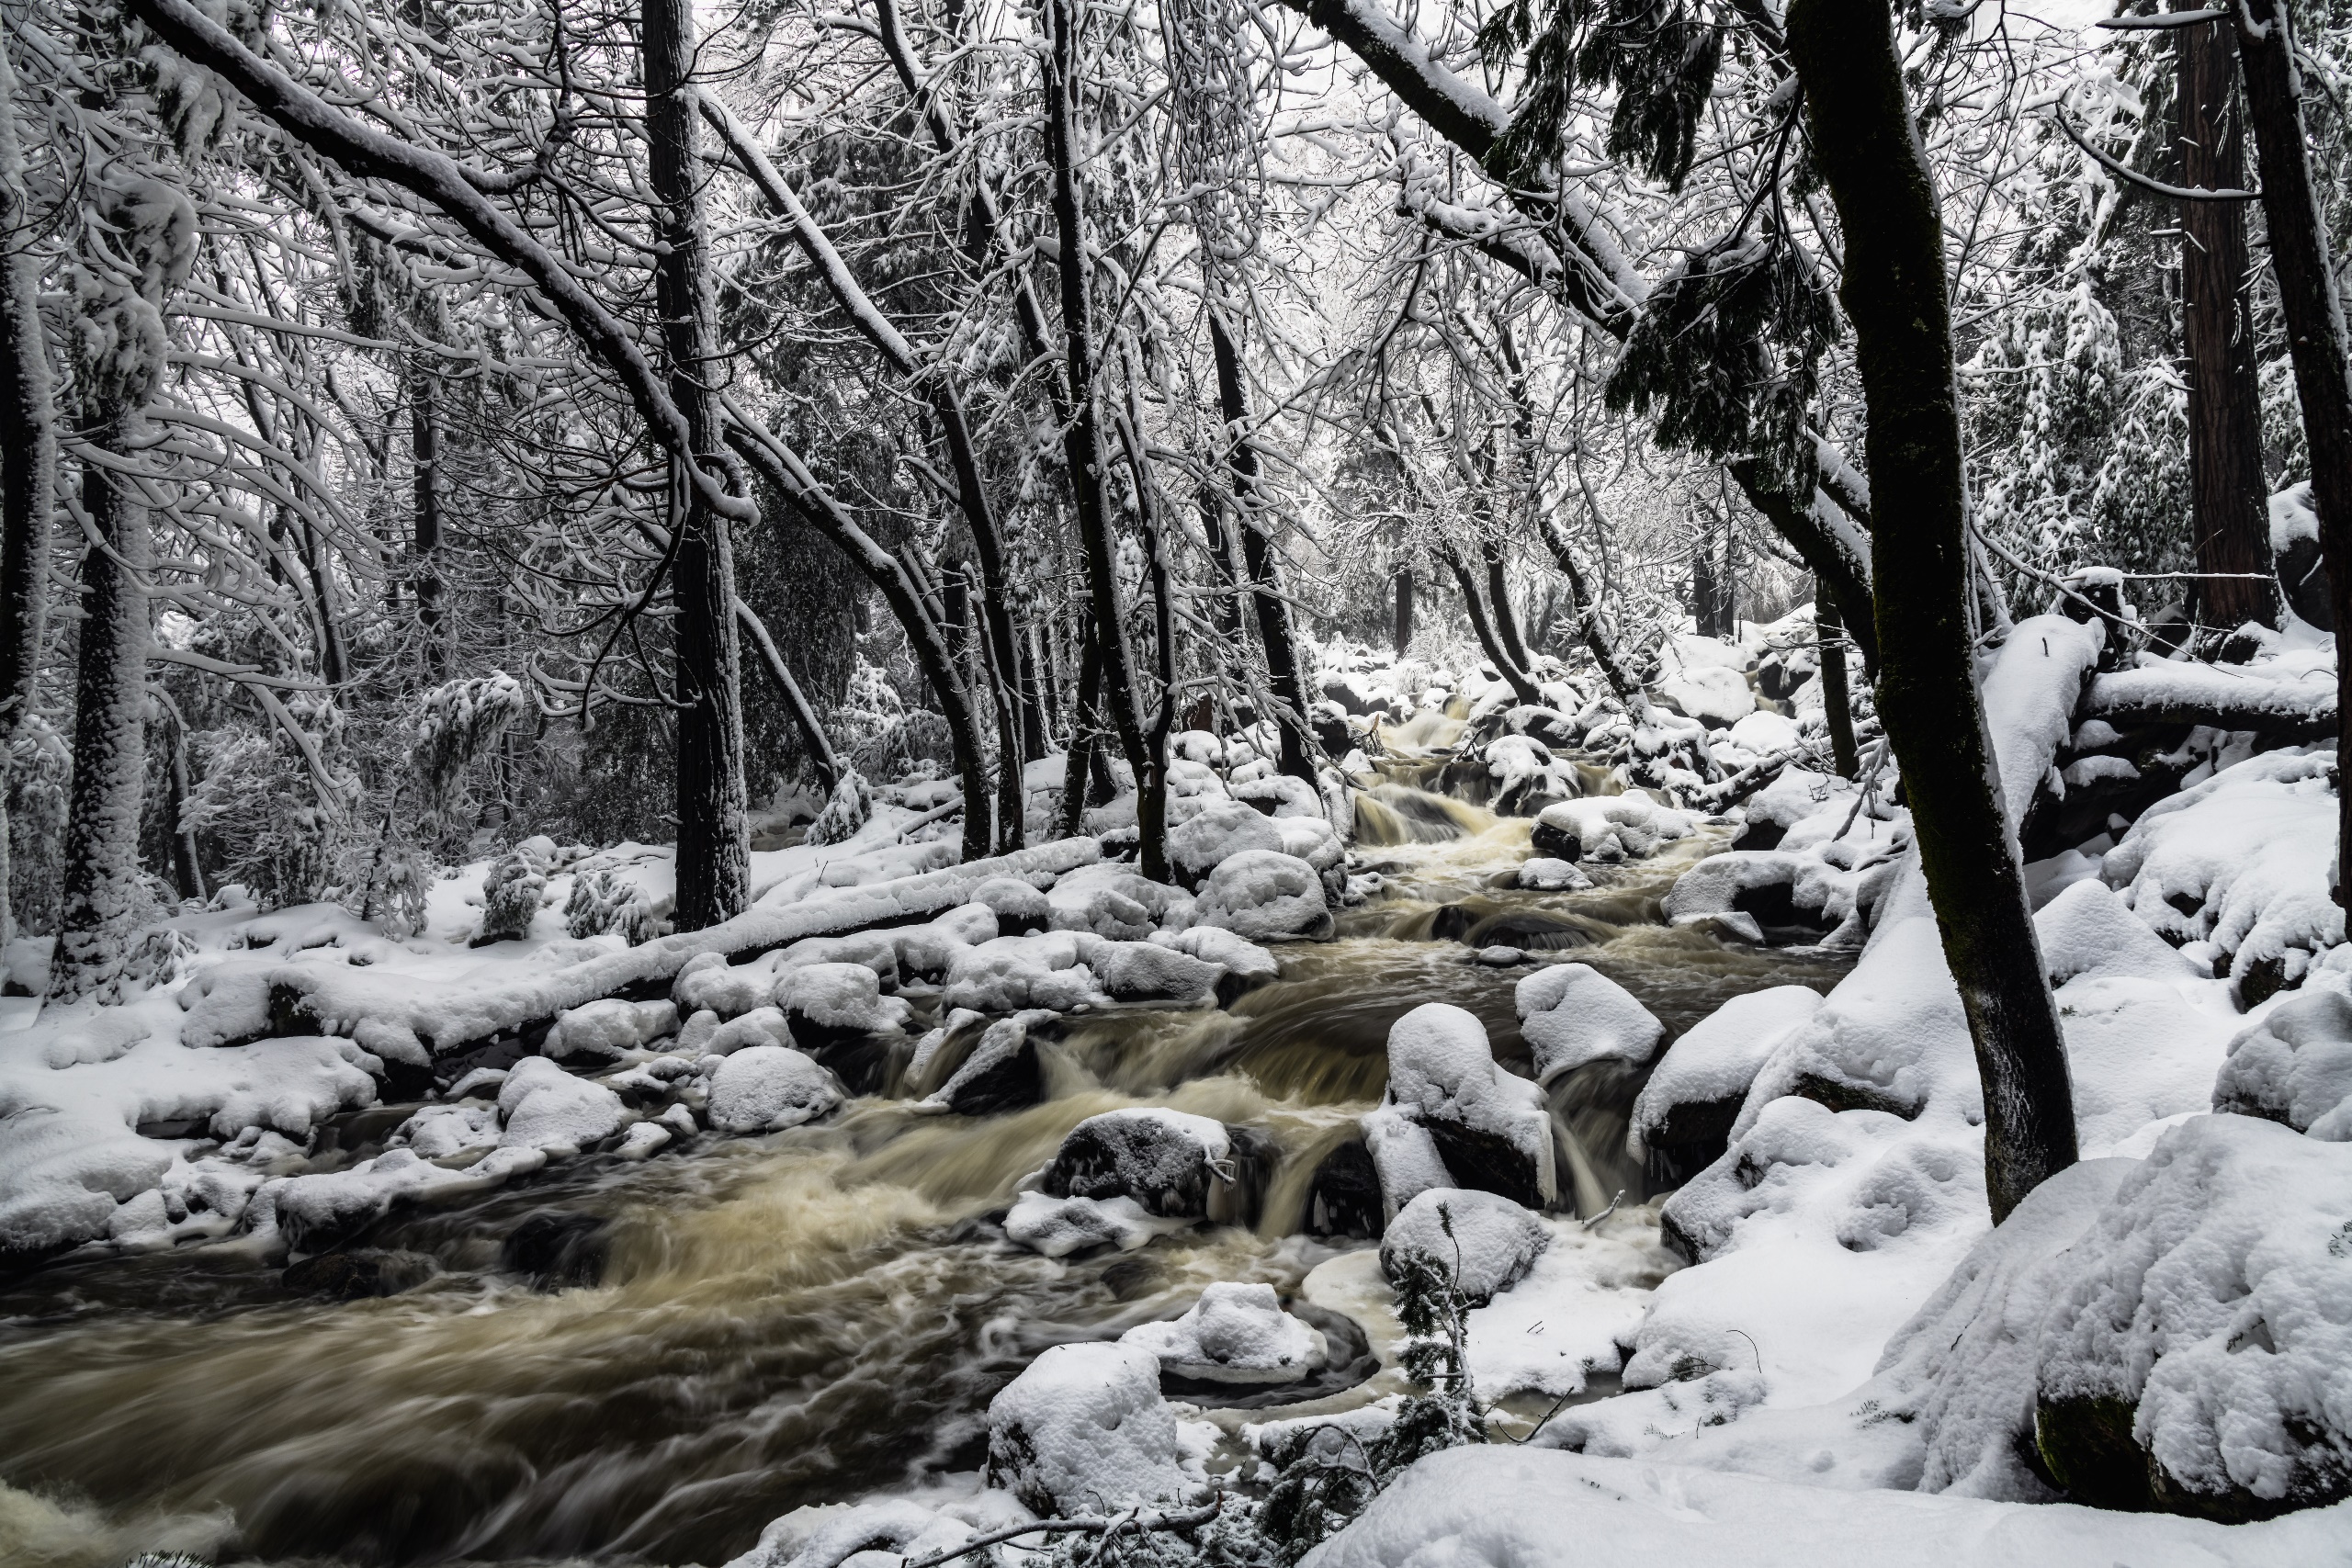 General 2560x1707 winter trees snow nature USA water branch river forest snow covered photography